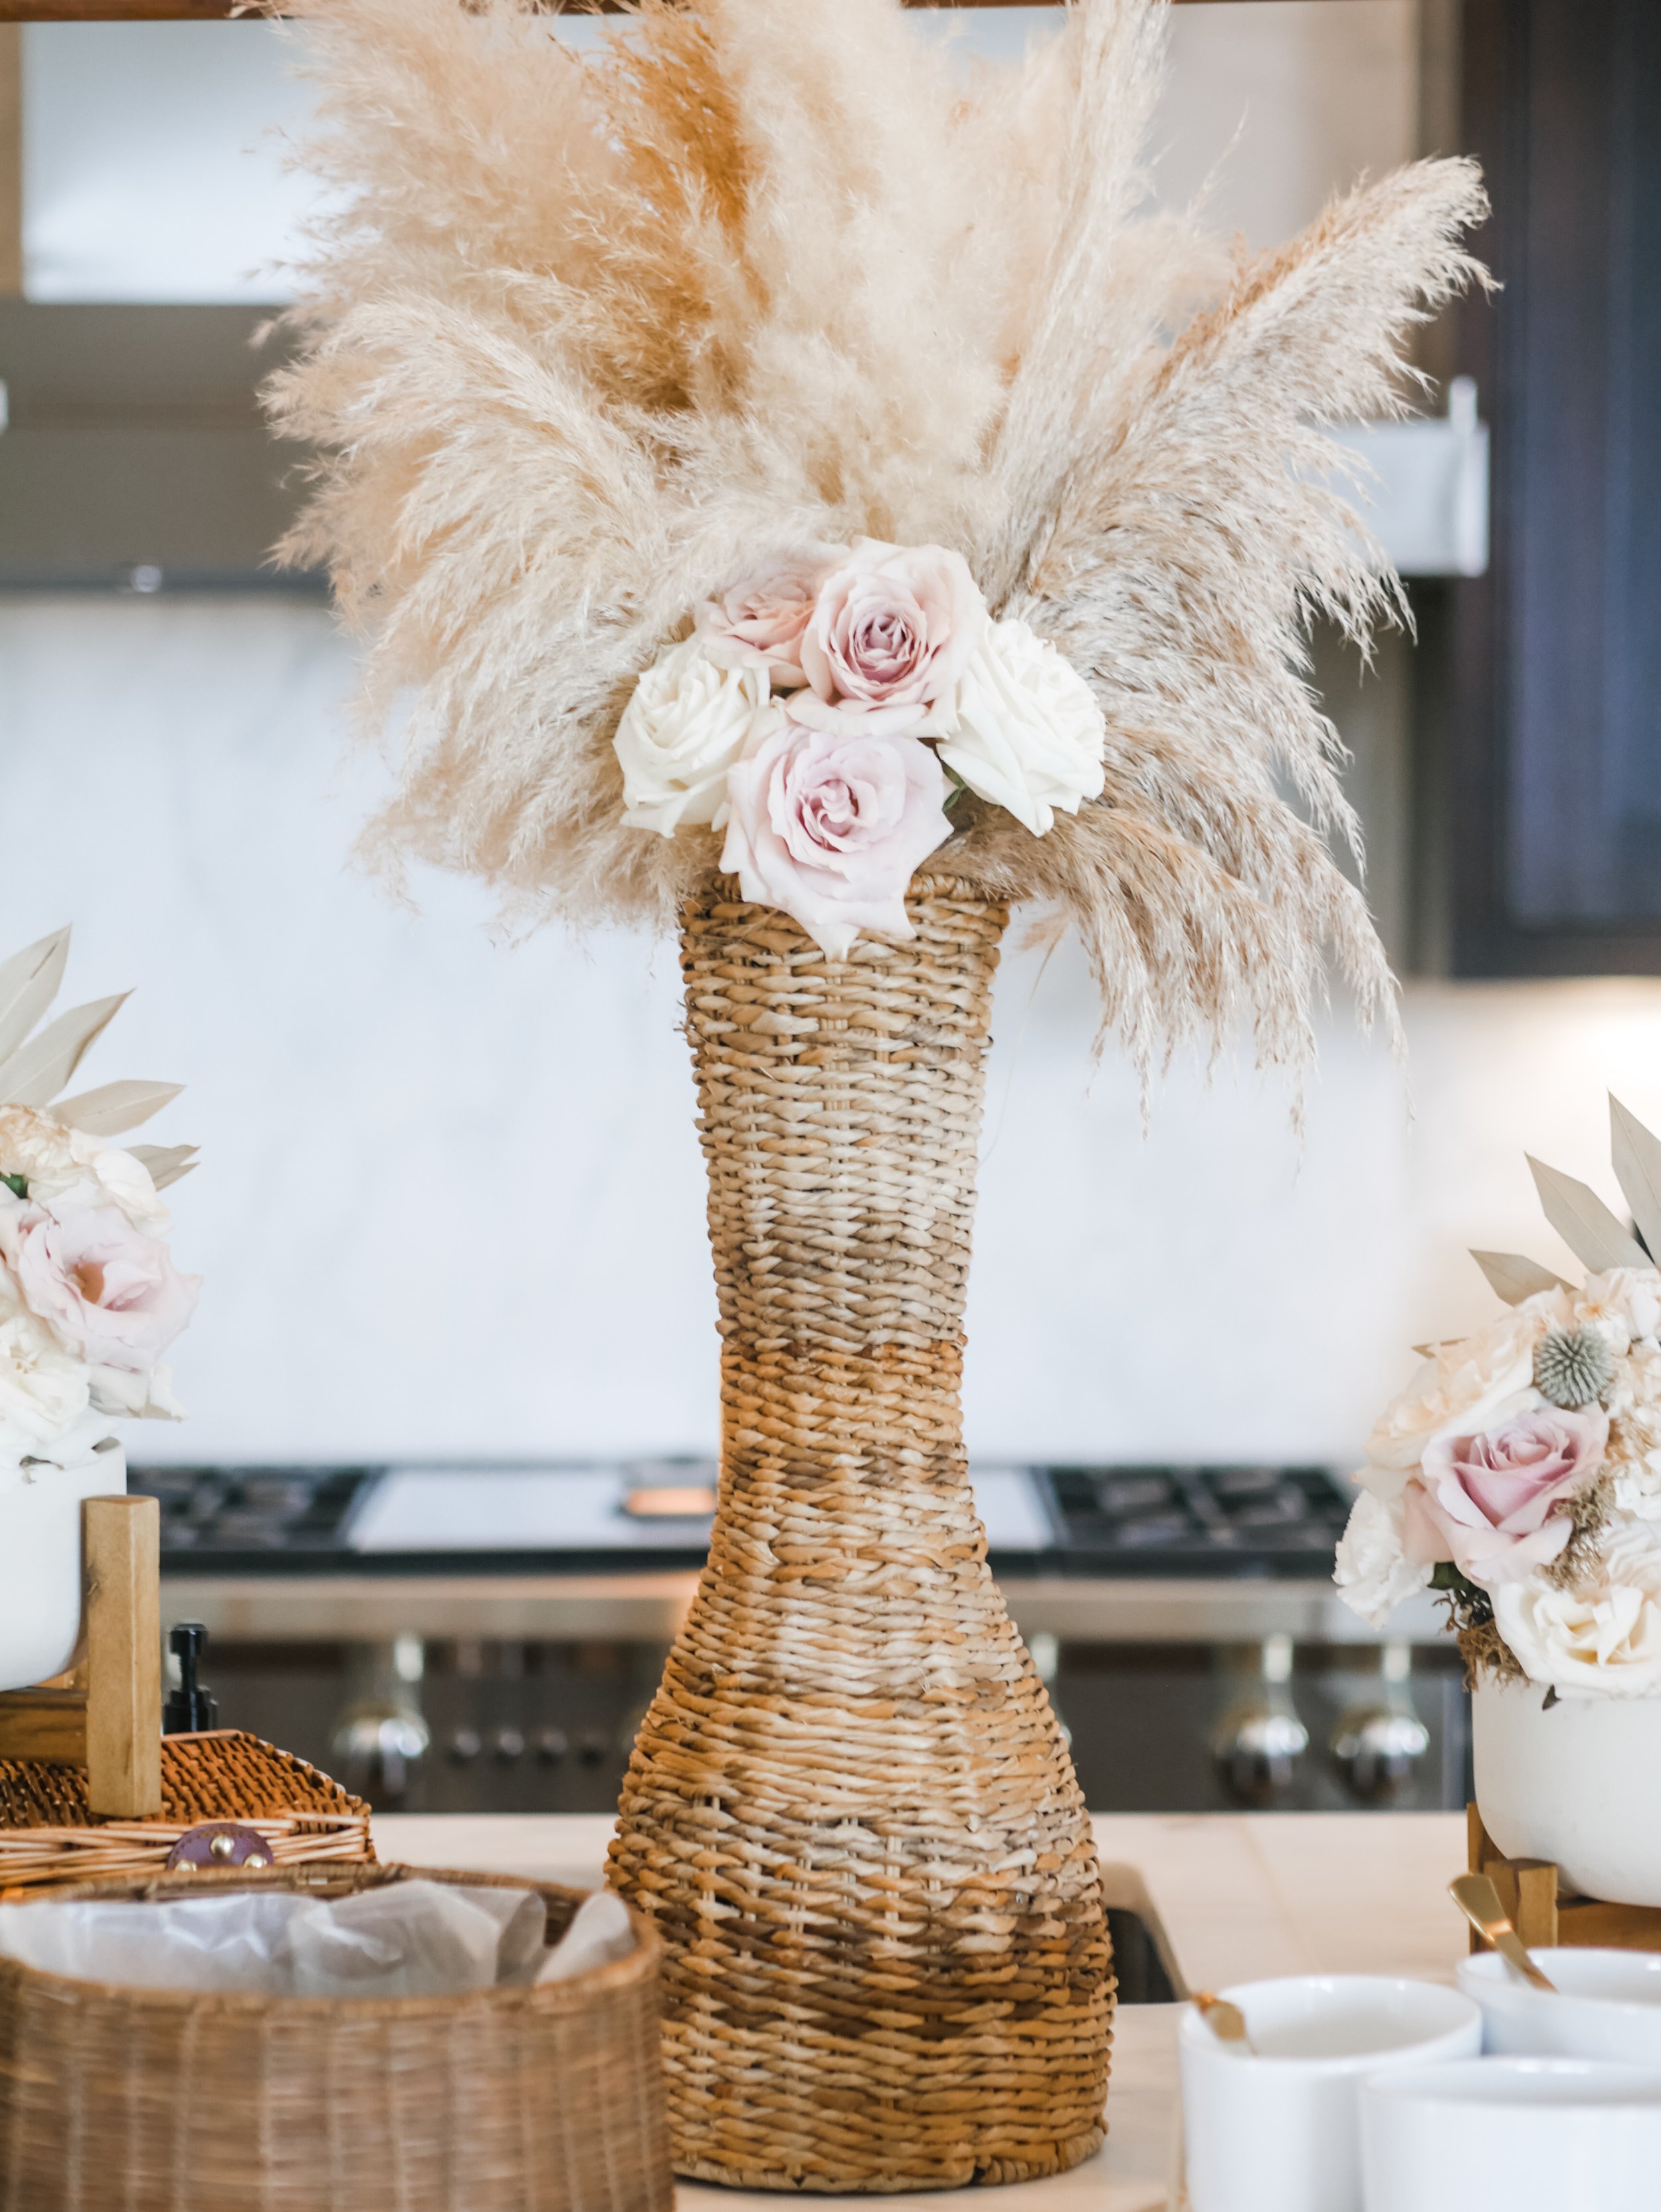  Host a stylish and relaxed Tulum beach-inspired Baby Shower with these ideas for food bar, drink station, picnic style seating, decor and more from event designer Carolina of MINT Event Design in Austin, Texas. Get details and tons more party inspir